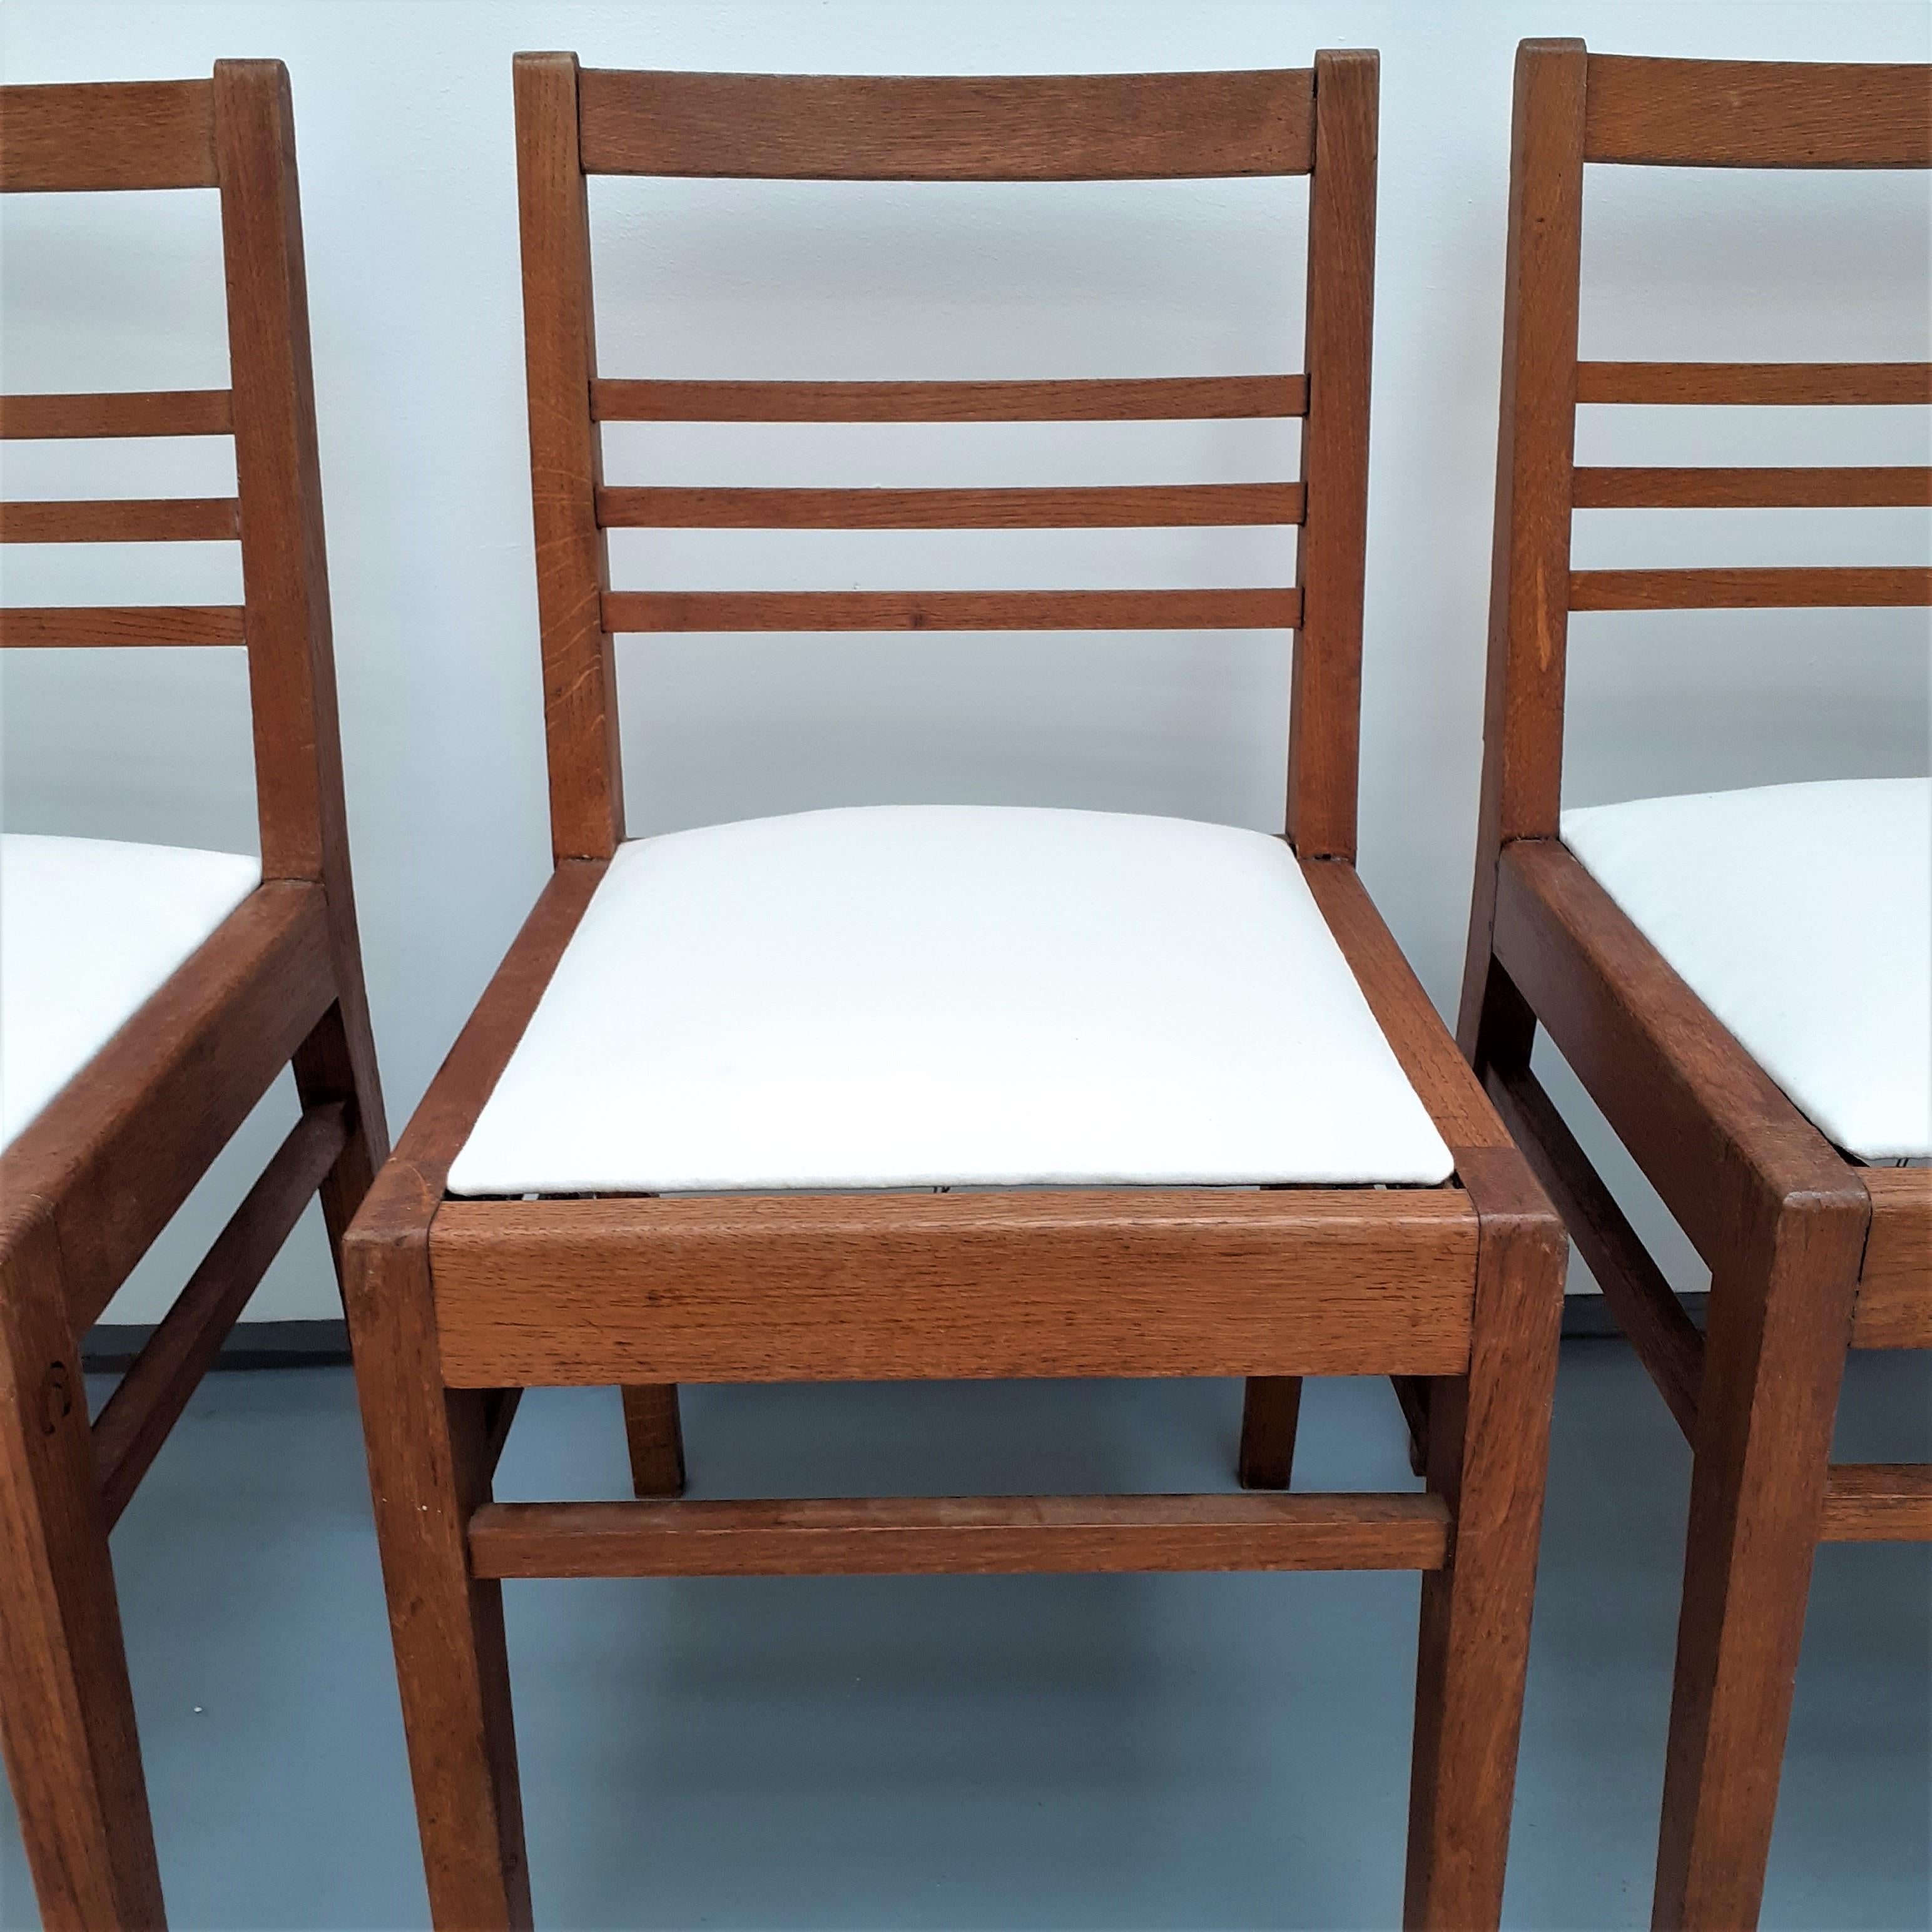 Set of 4 oak chairs with white fabric seat by René Gabriel, 1950s

René Gabriel (1899 - 1950) is a precursor of French industrial design. He was one of the first to create, as early as the 1930s, economical mass-produced furniture combining